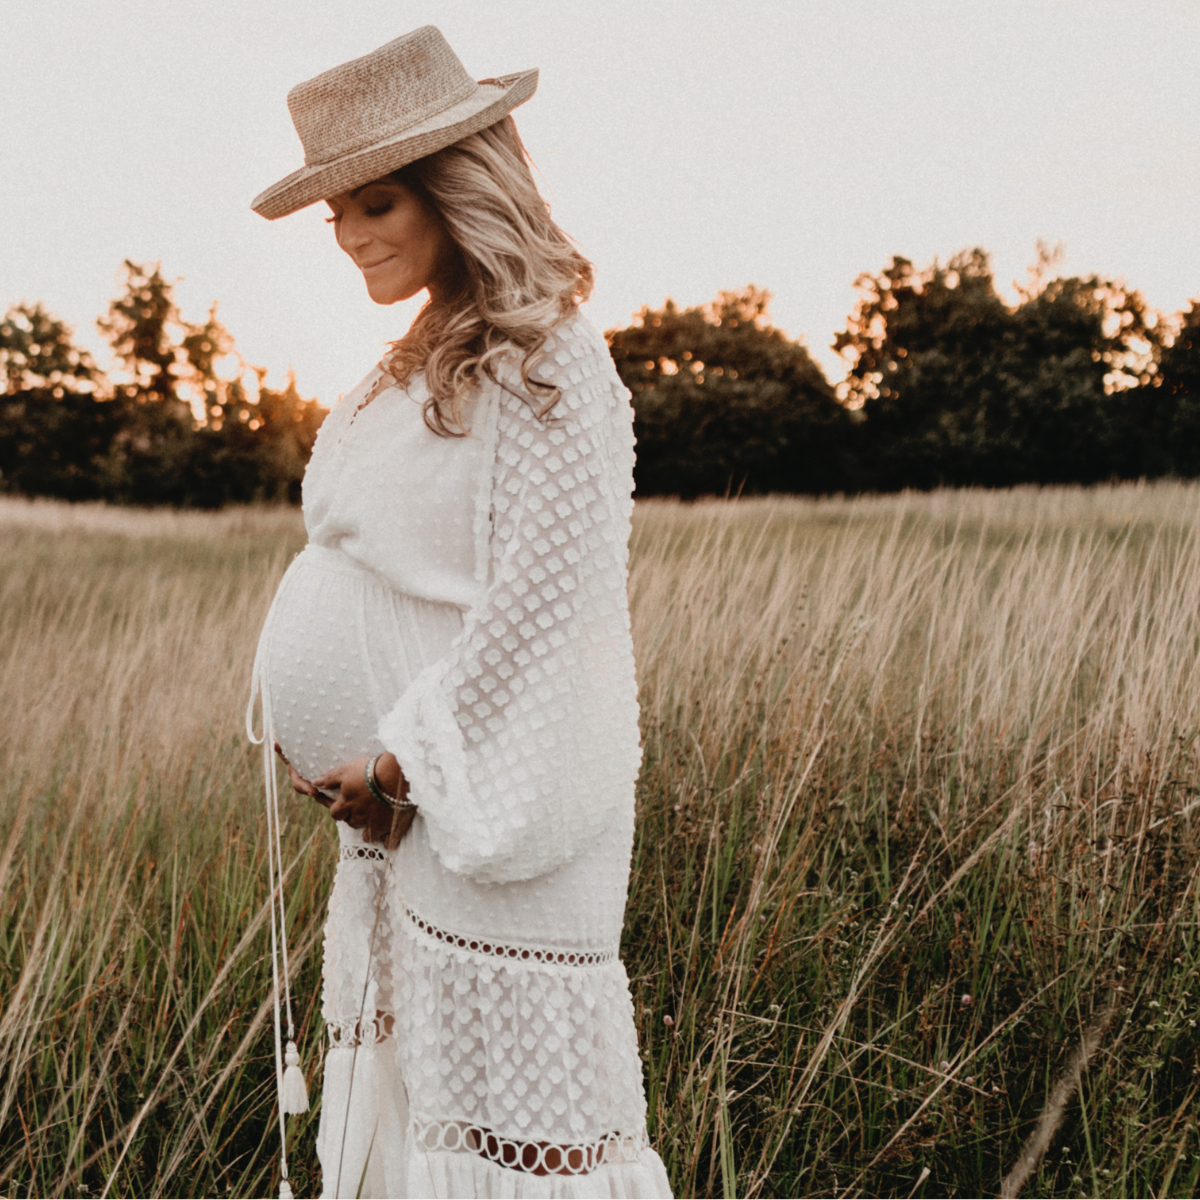 Pregnant Person In White Dress In A Field Wearing a Straw Hat